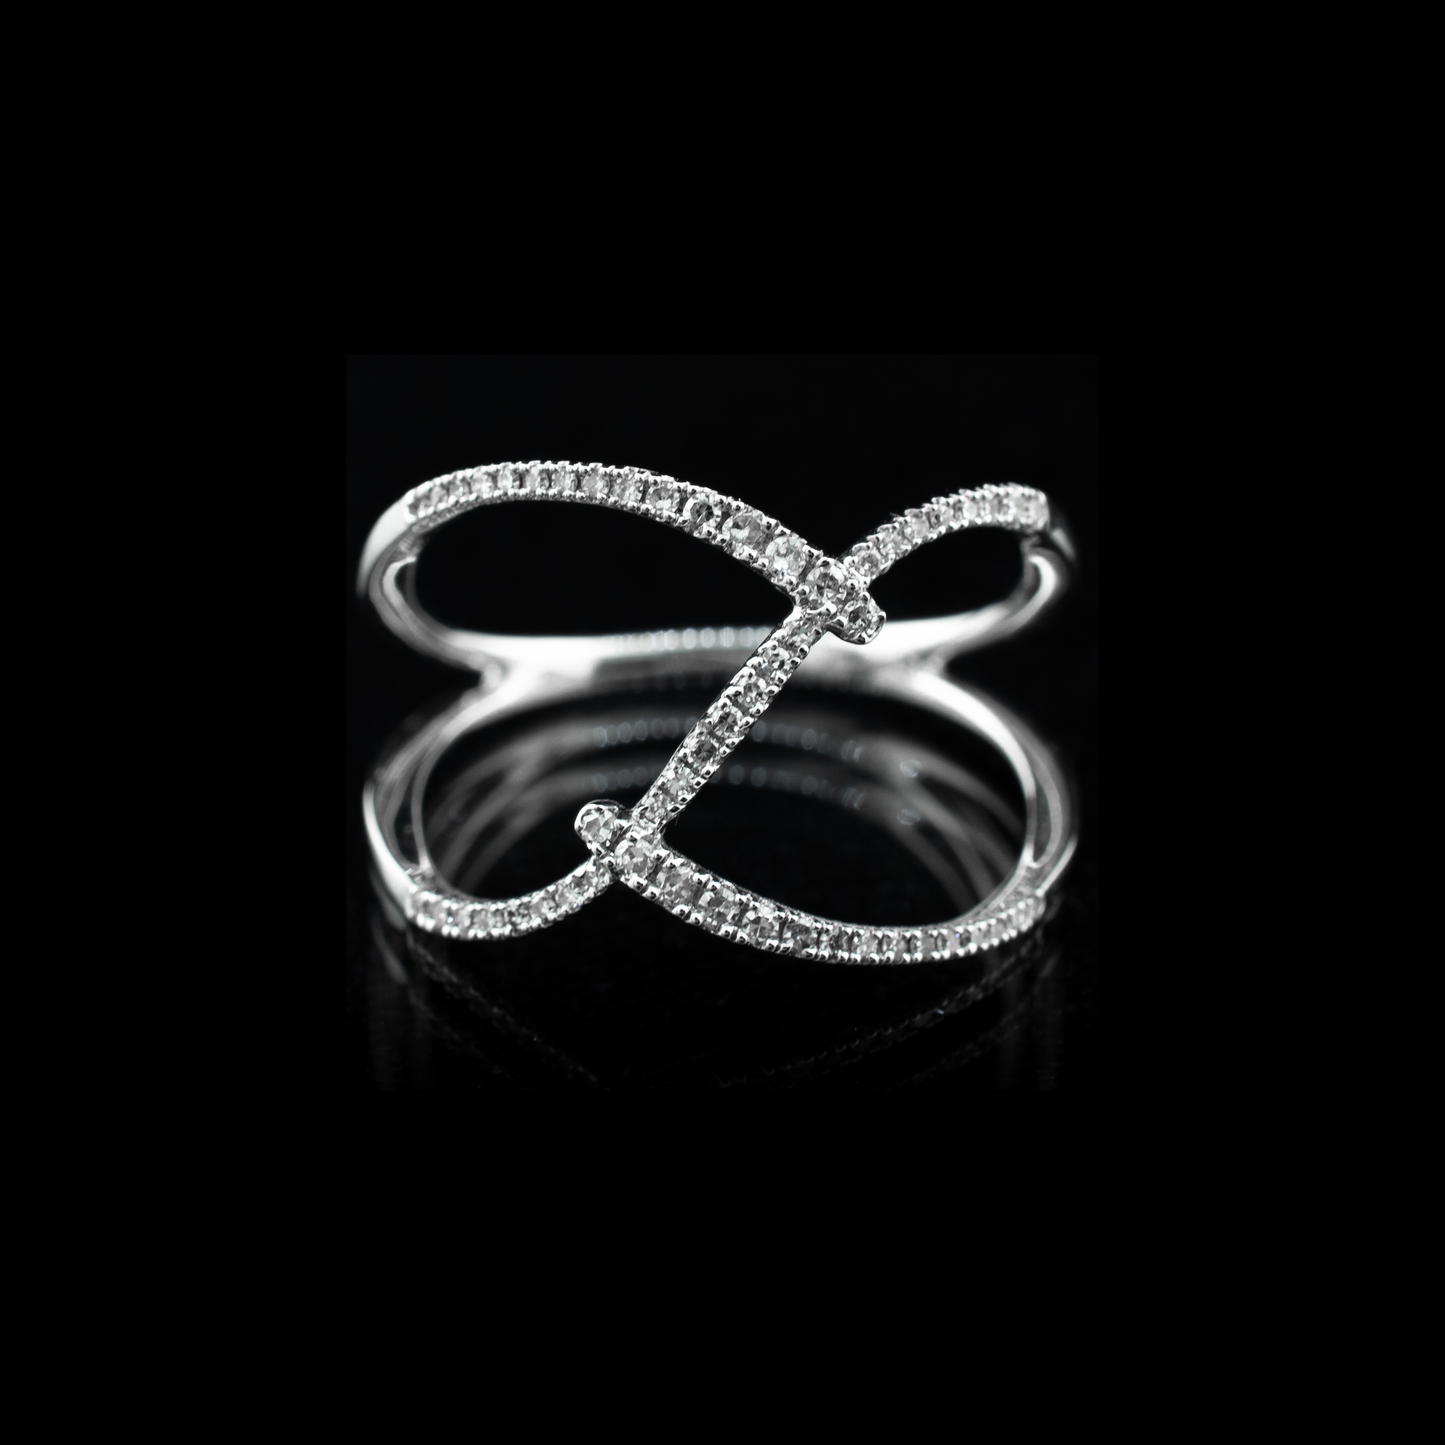 The Open Infinity Ring